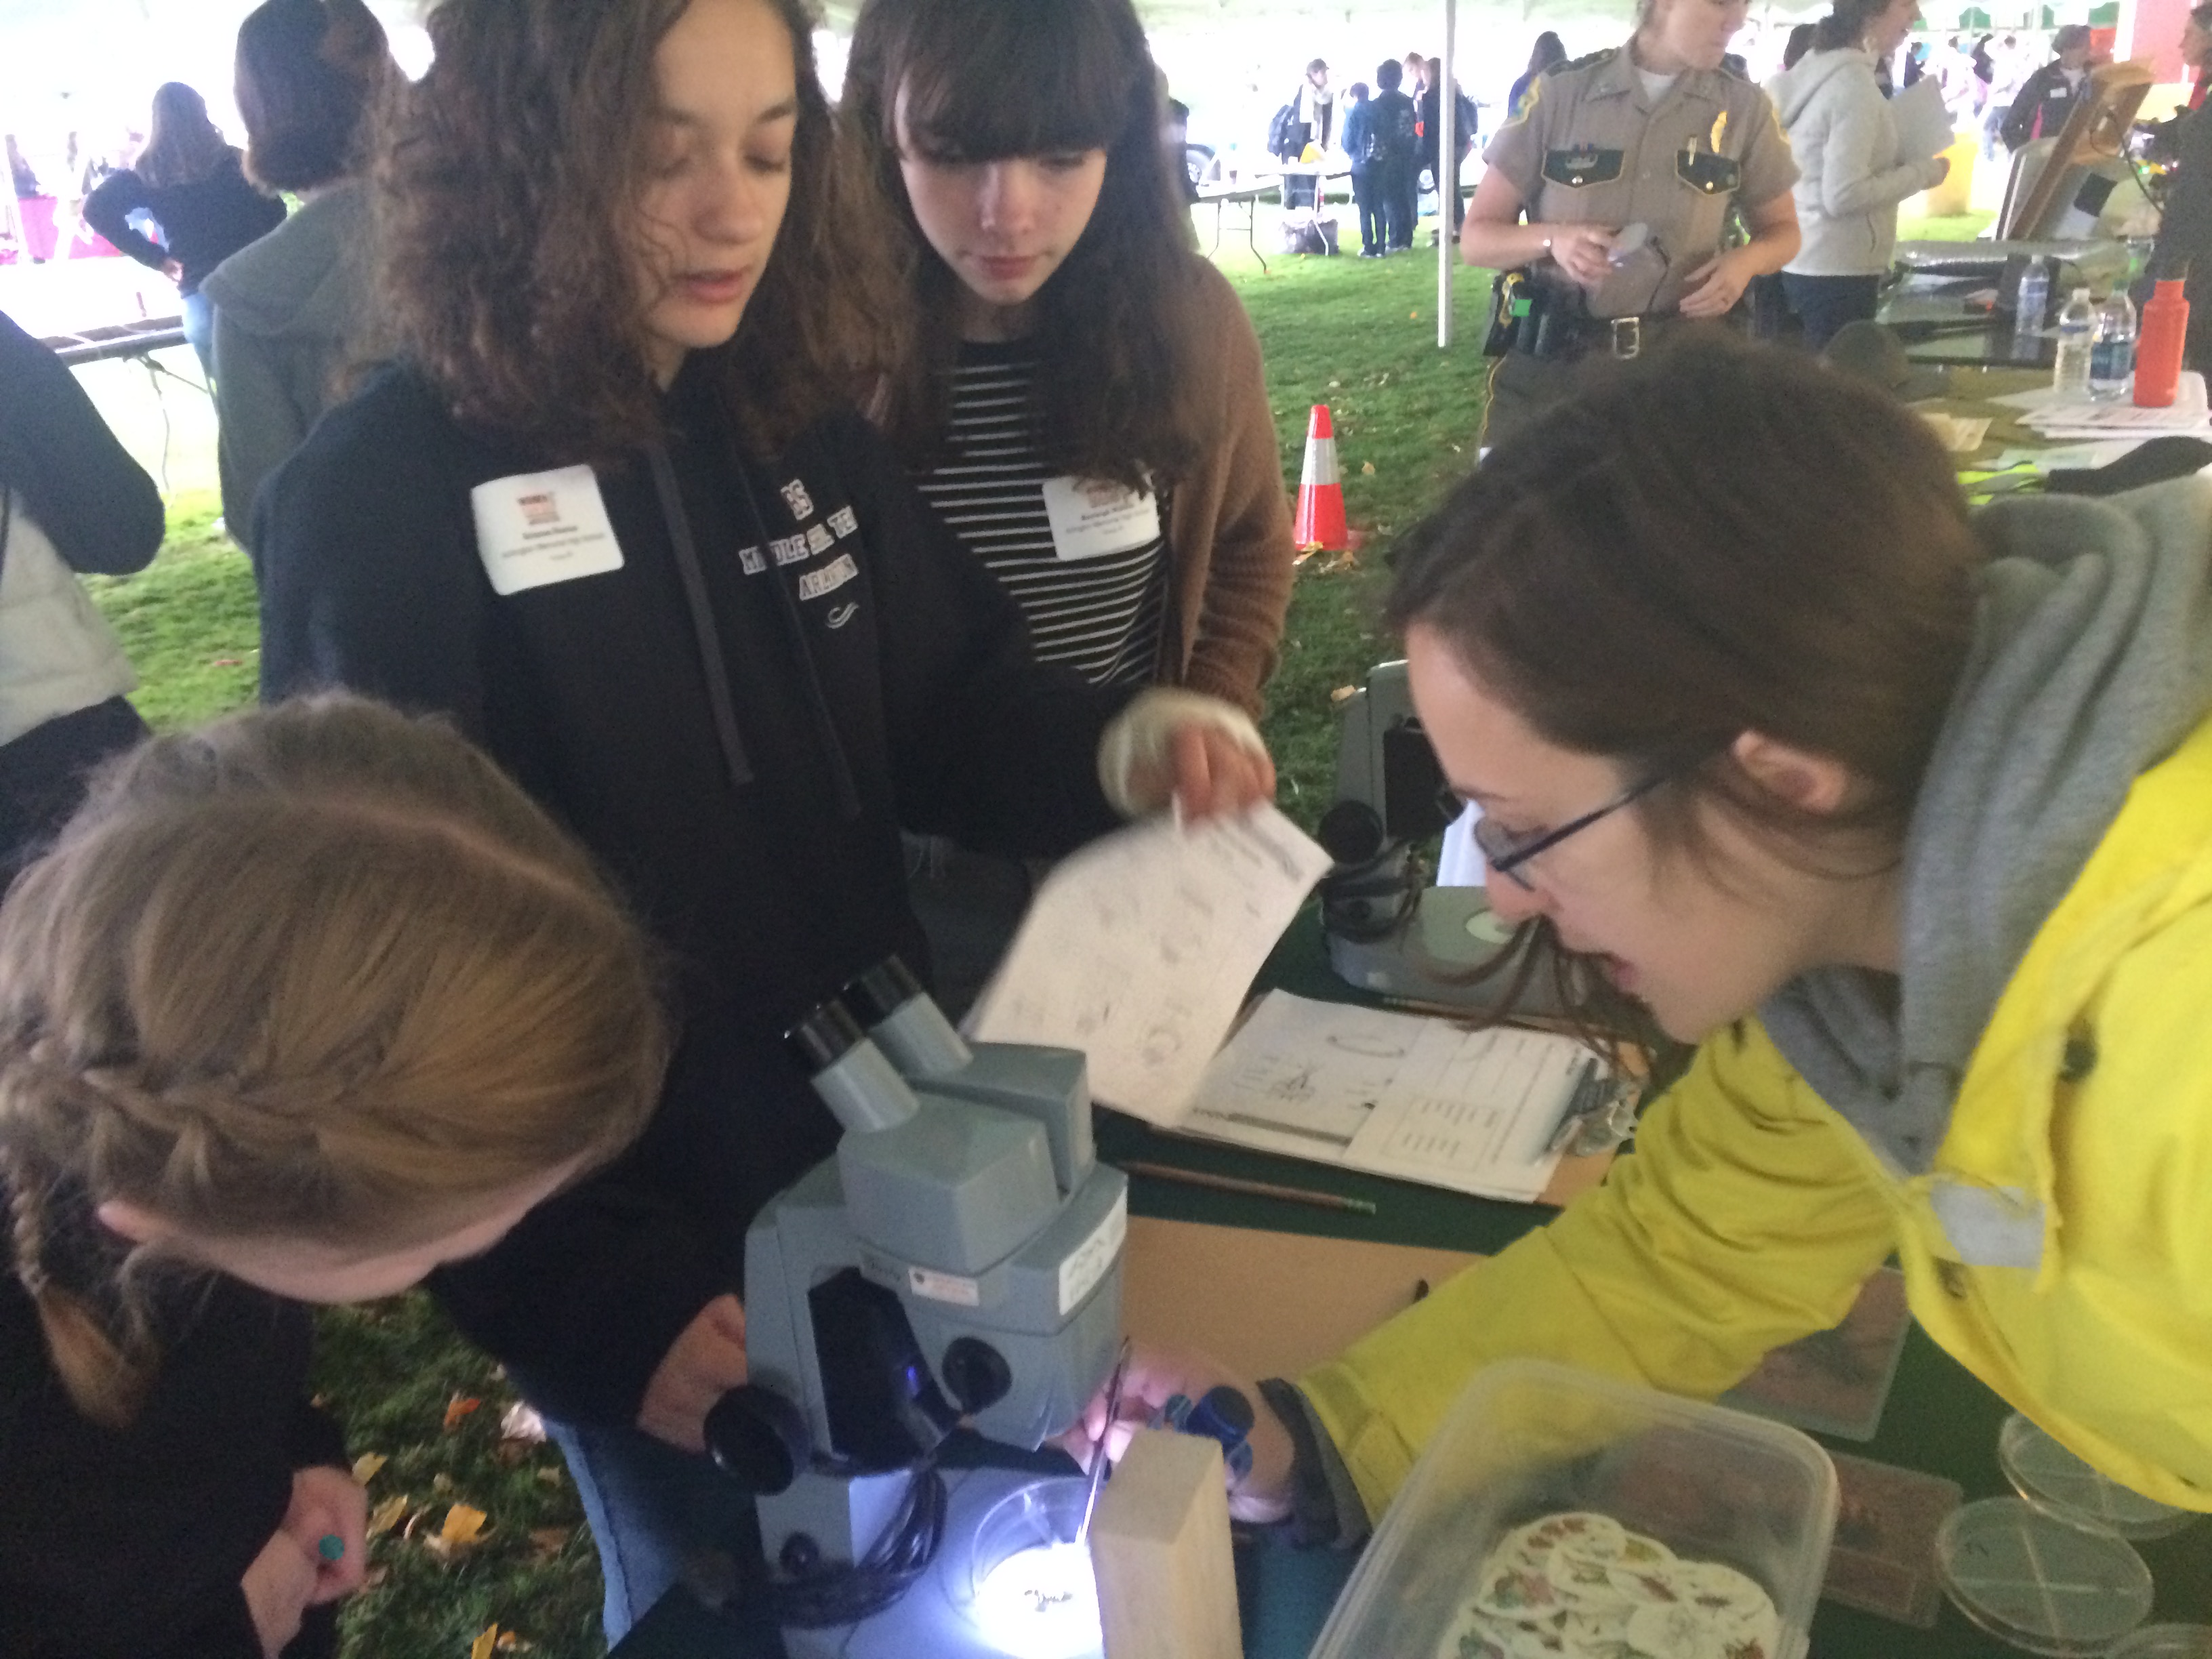 Attendees at the Women Can Do conference examine macroinvertebrates